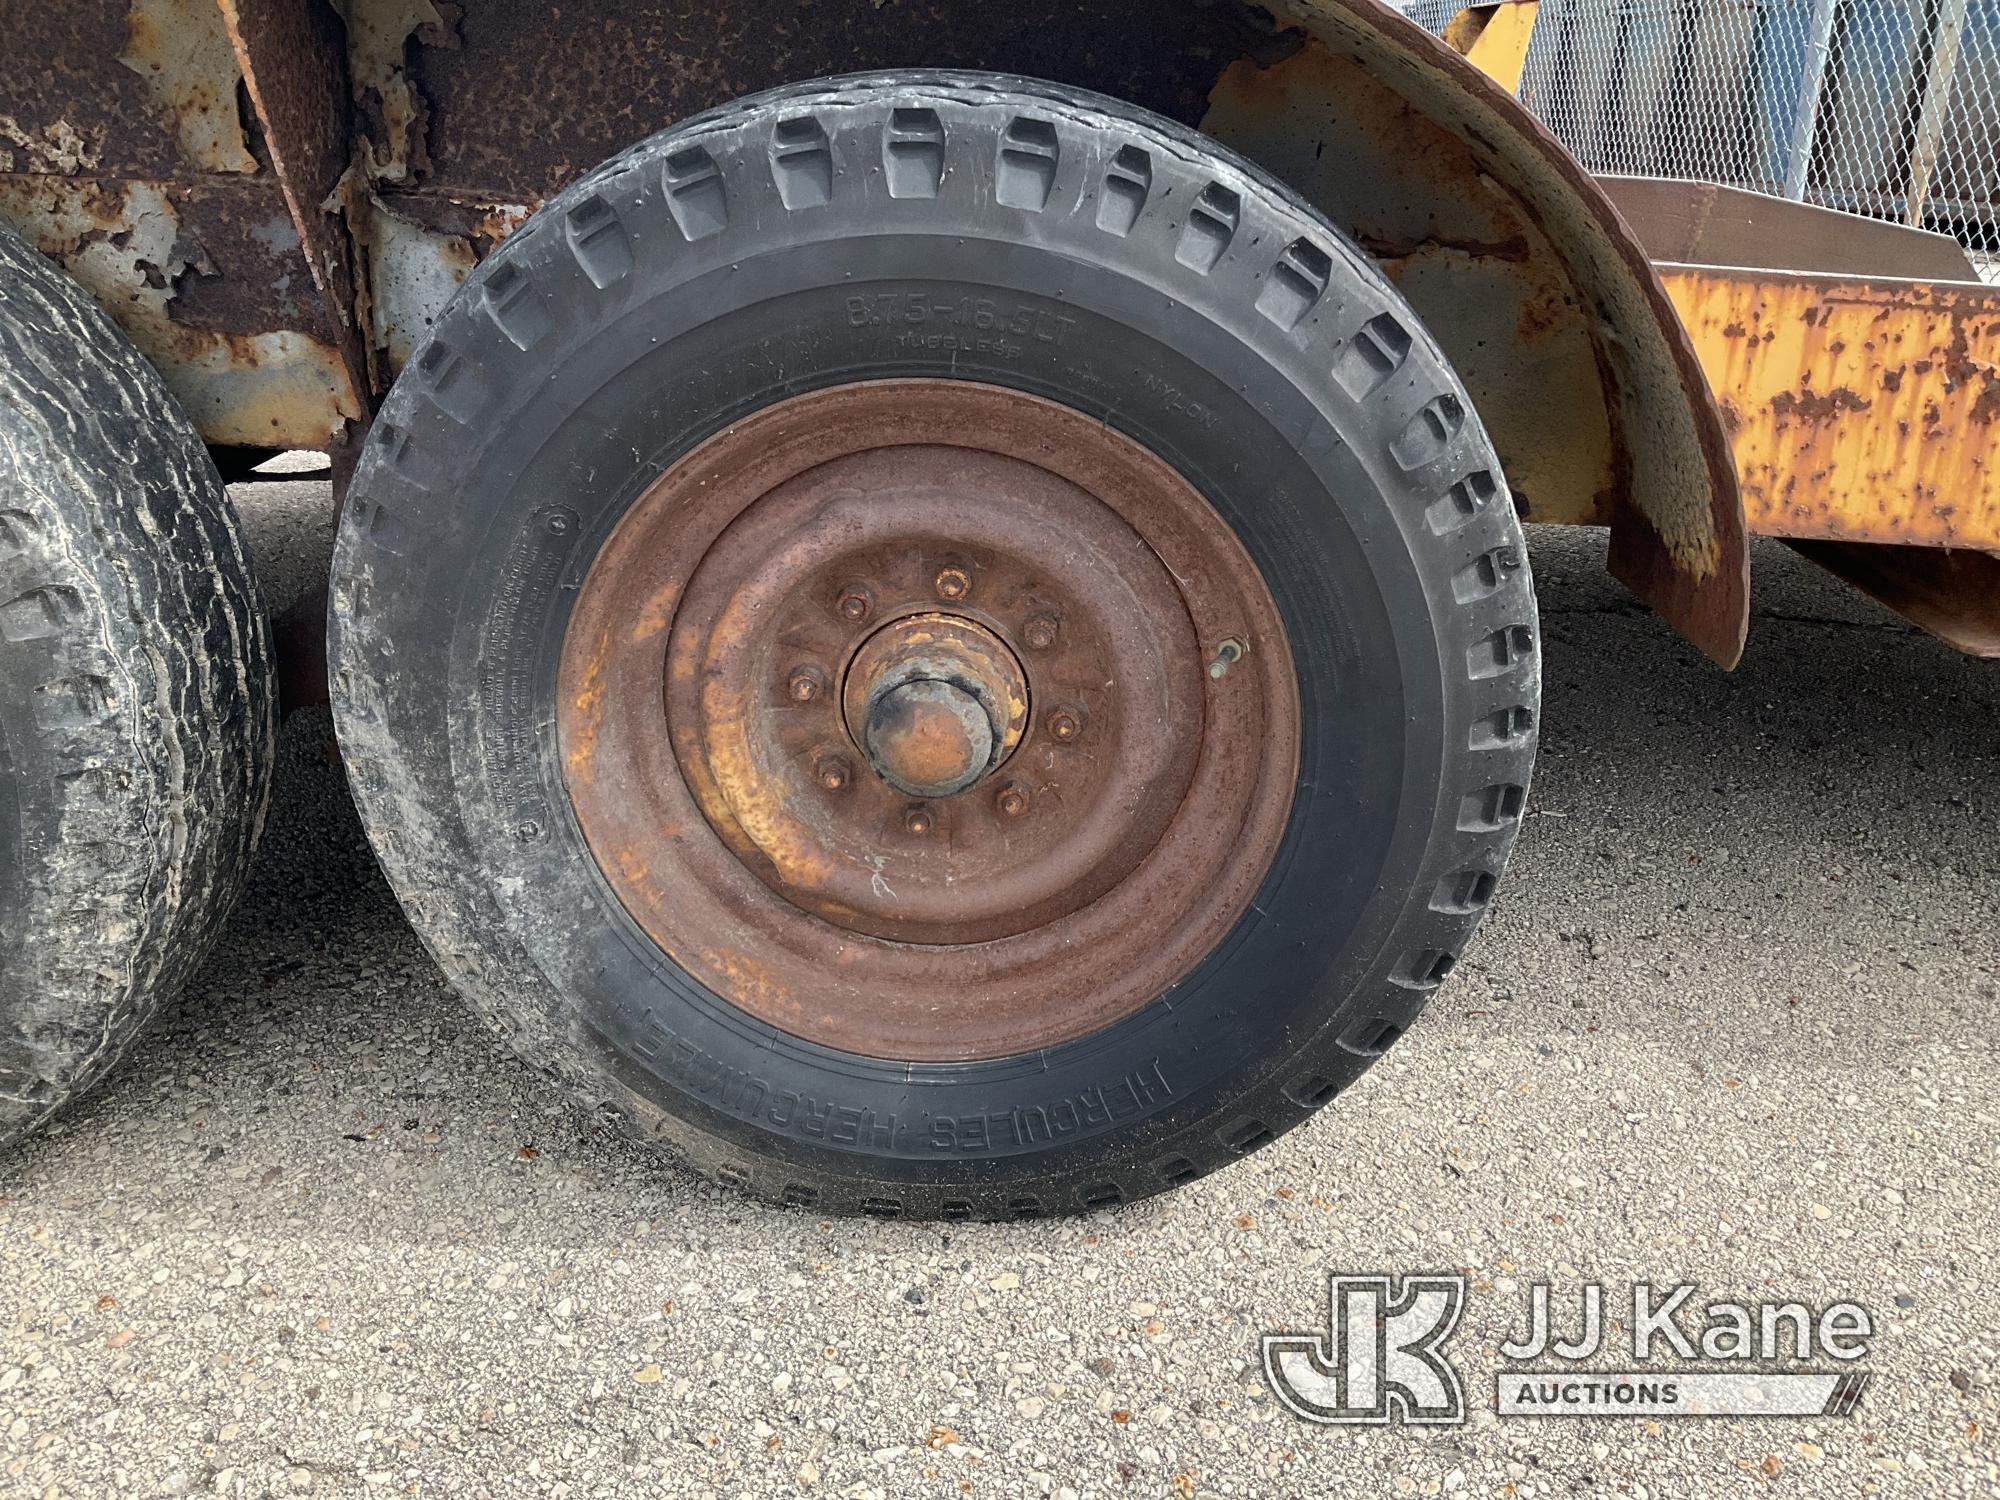 (Sun Prairie, WI) 1984 Butler LT1014 Trailer Needs tire (weathered, old age)  Deck Is 6FT Wide And 1